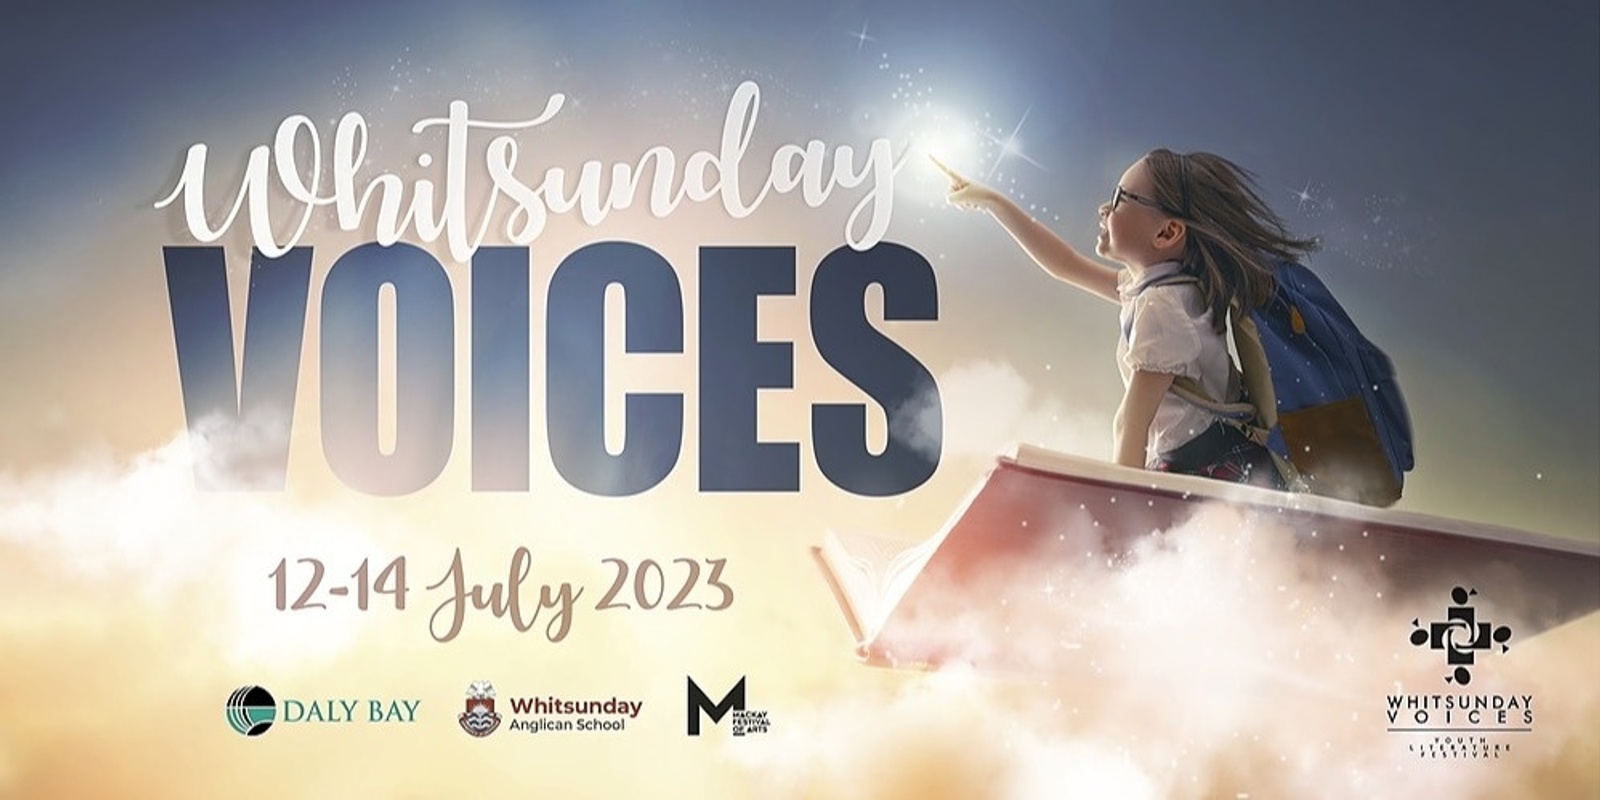 Banner image for Whitsunday Voices Youth Literature Festival 2023